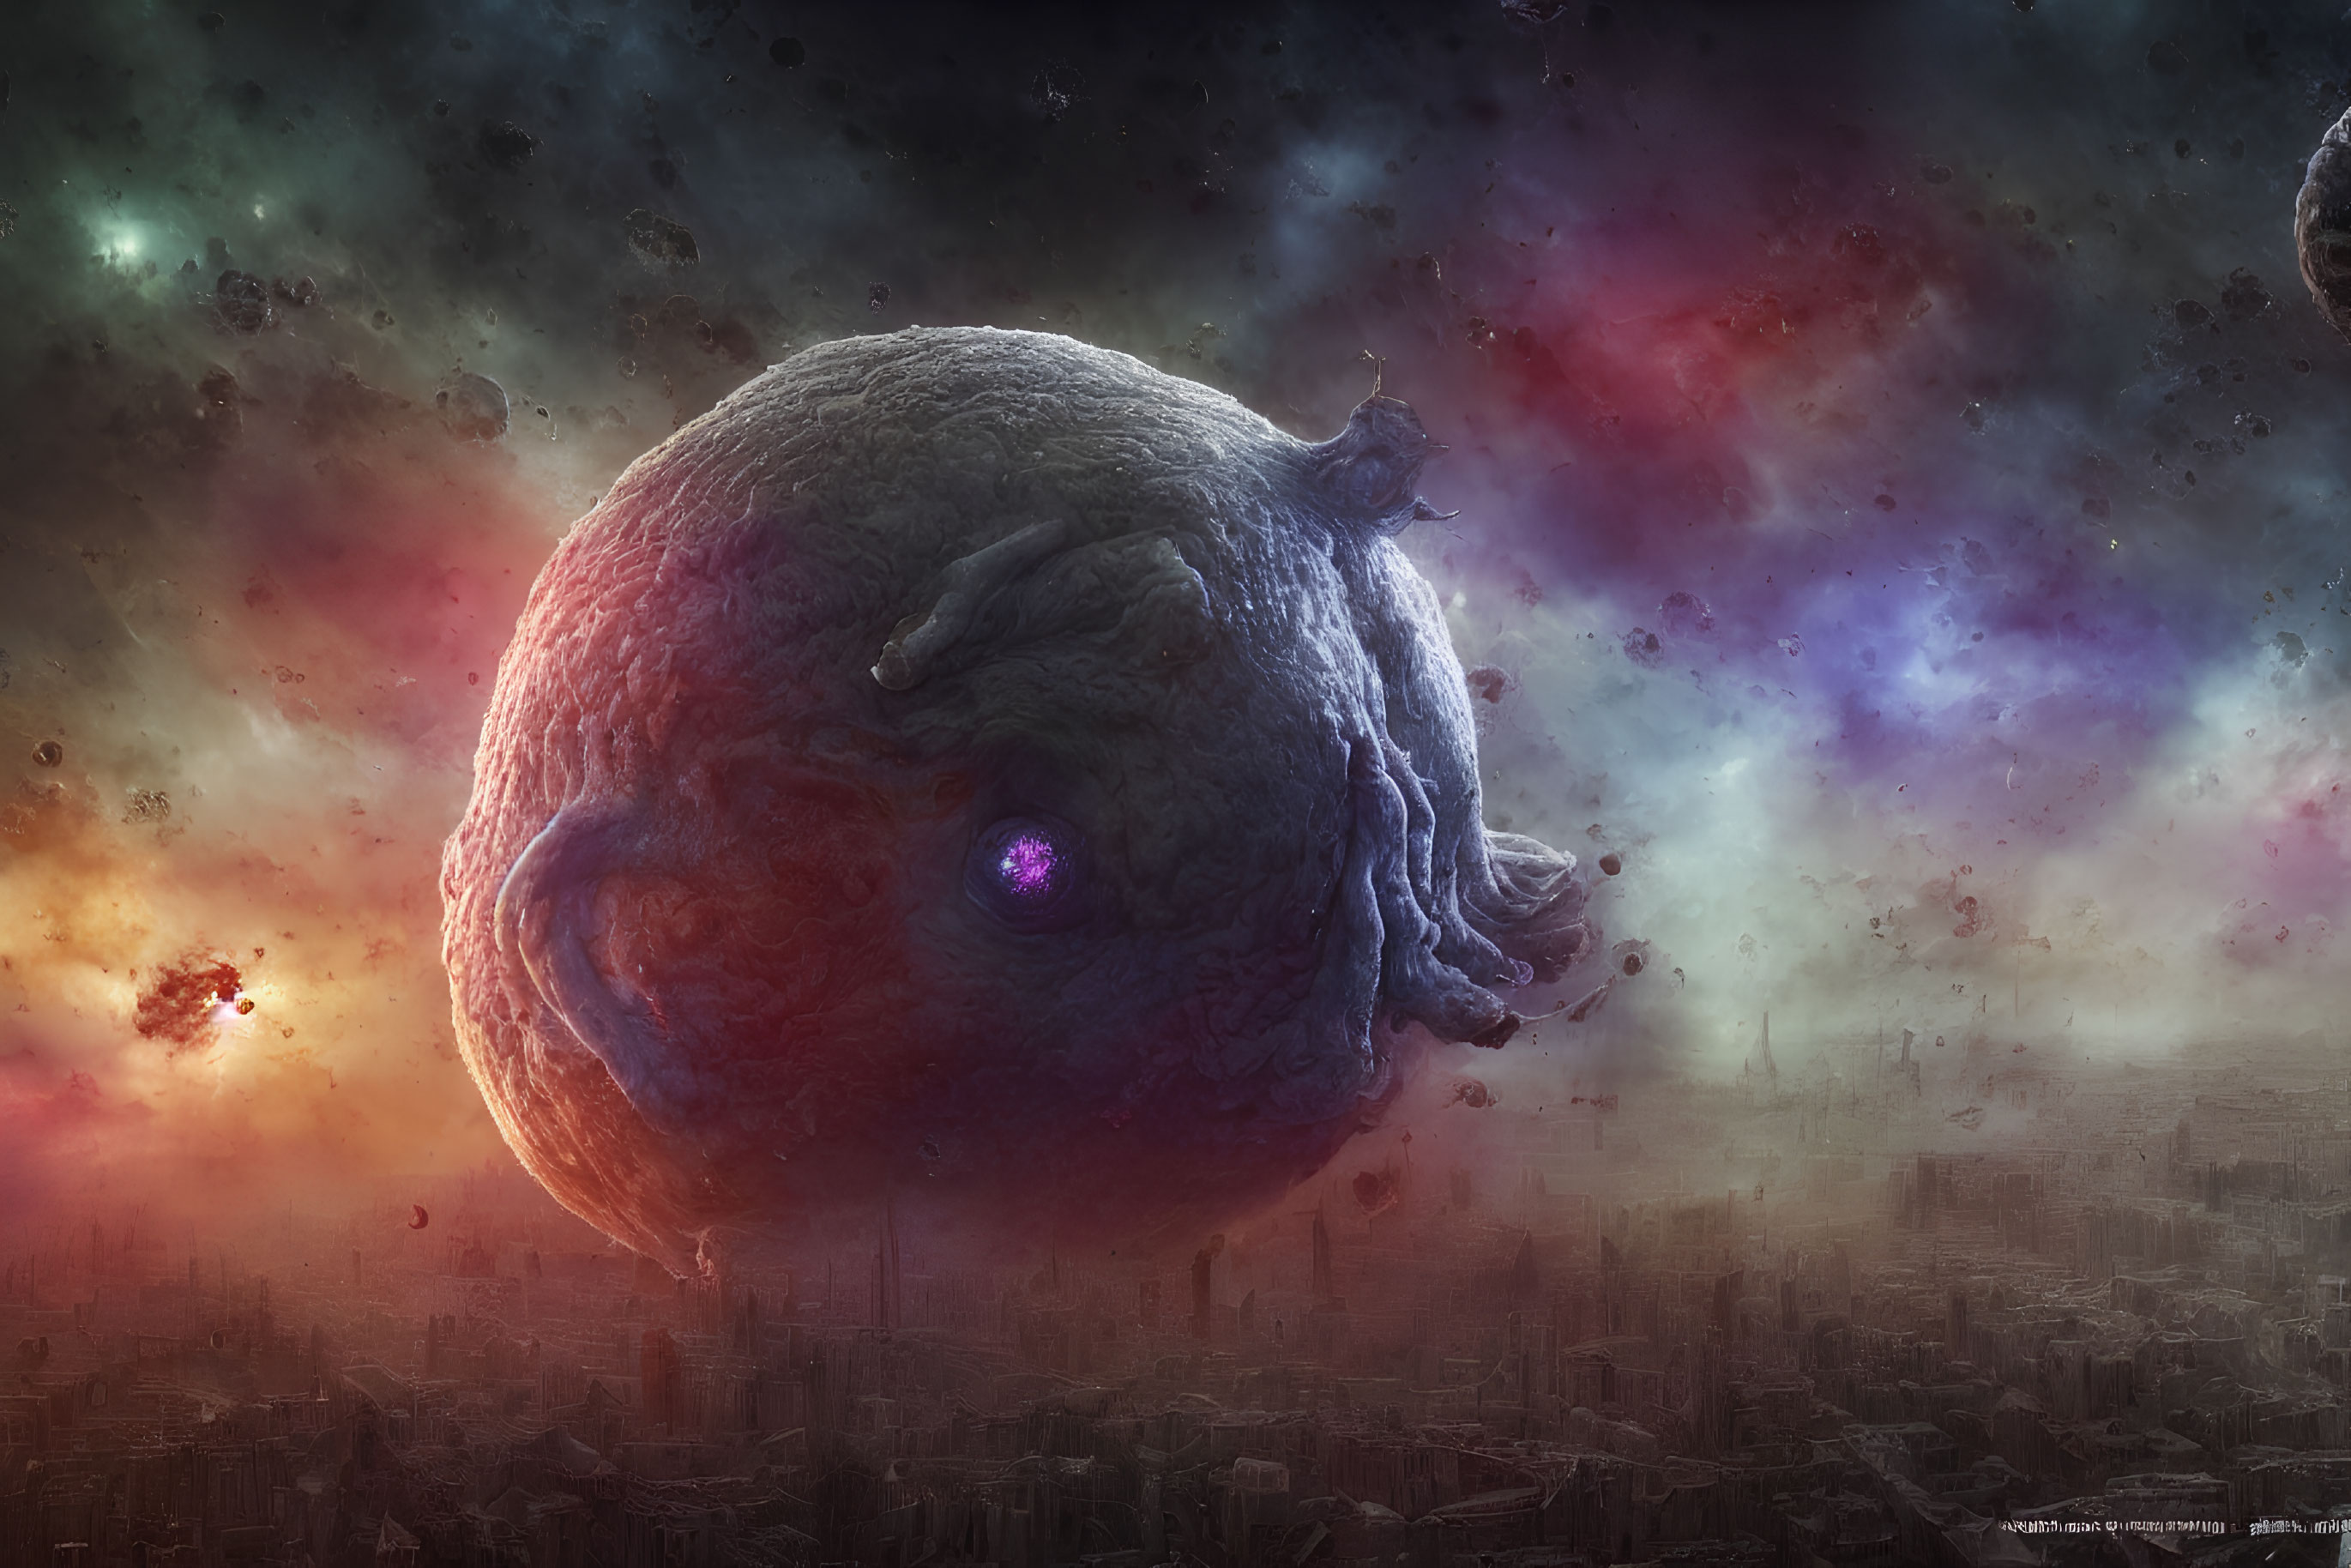 Giant textured planet above cityscape under colorful nebula sky